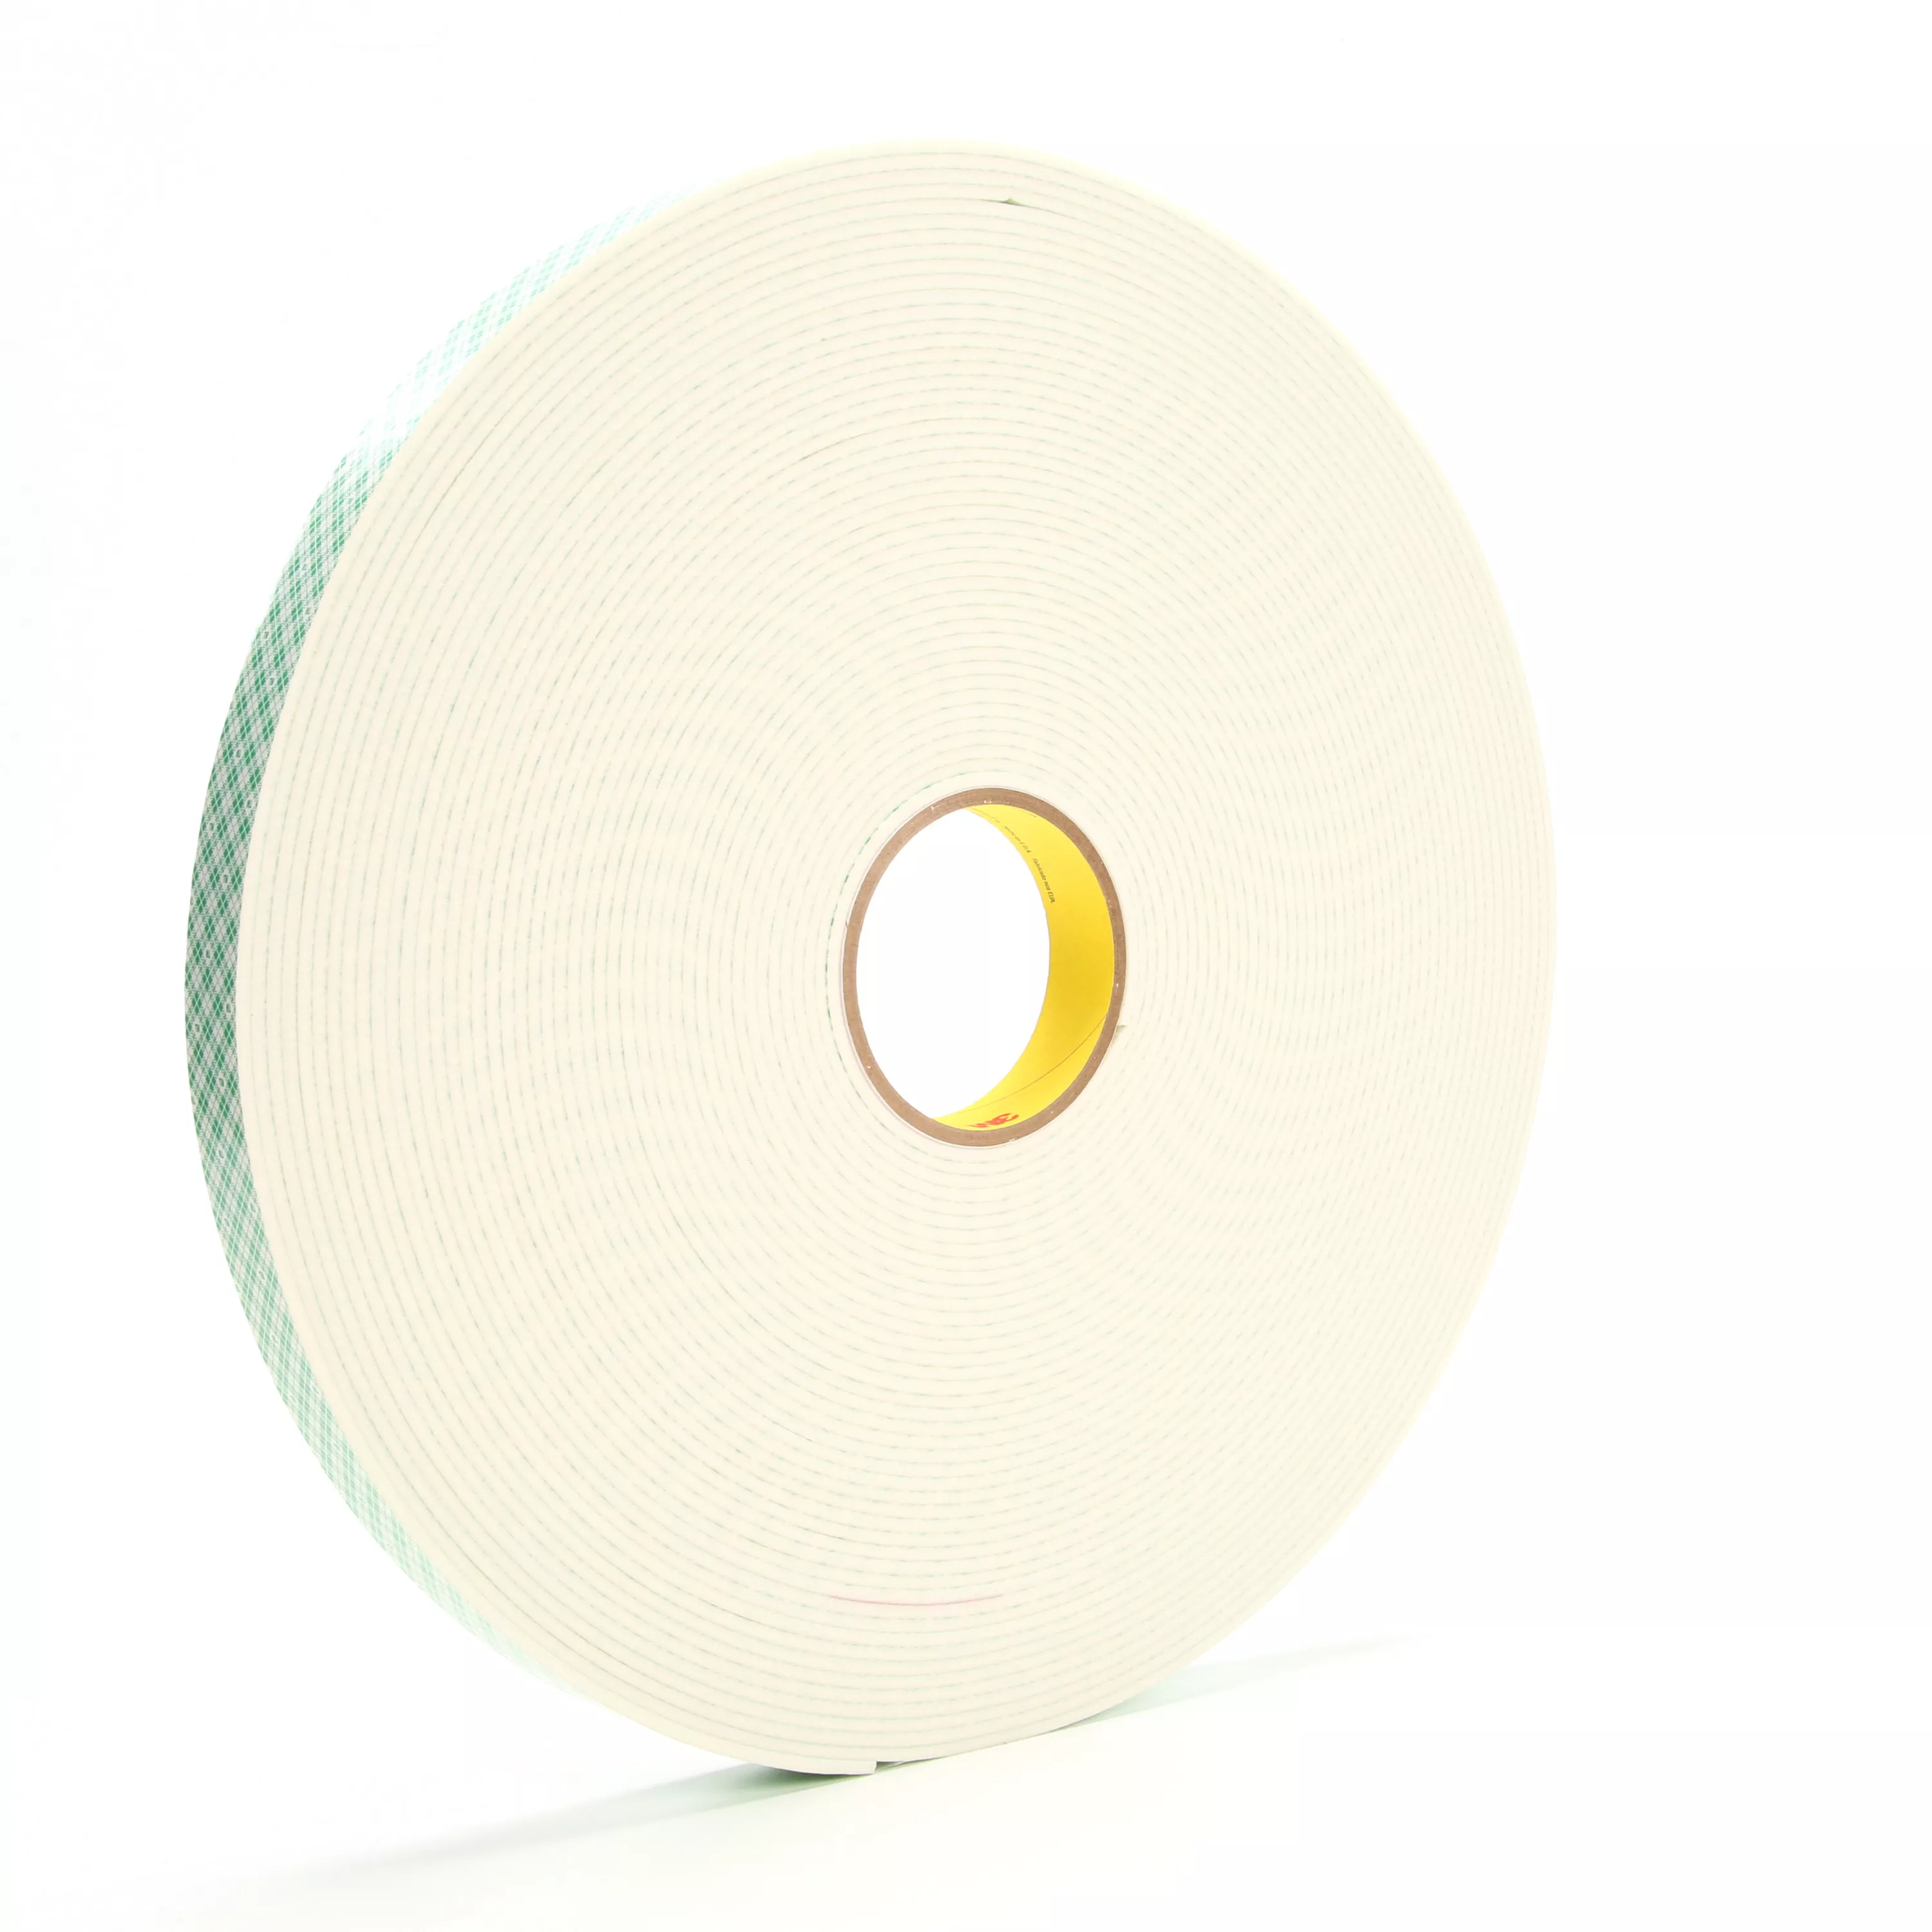 3M™ Double Coated Urethane Foam Tape 4008, Off White, 1 in x 36 yd, 125
mil, 9 Roll/Case